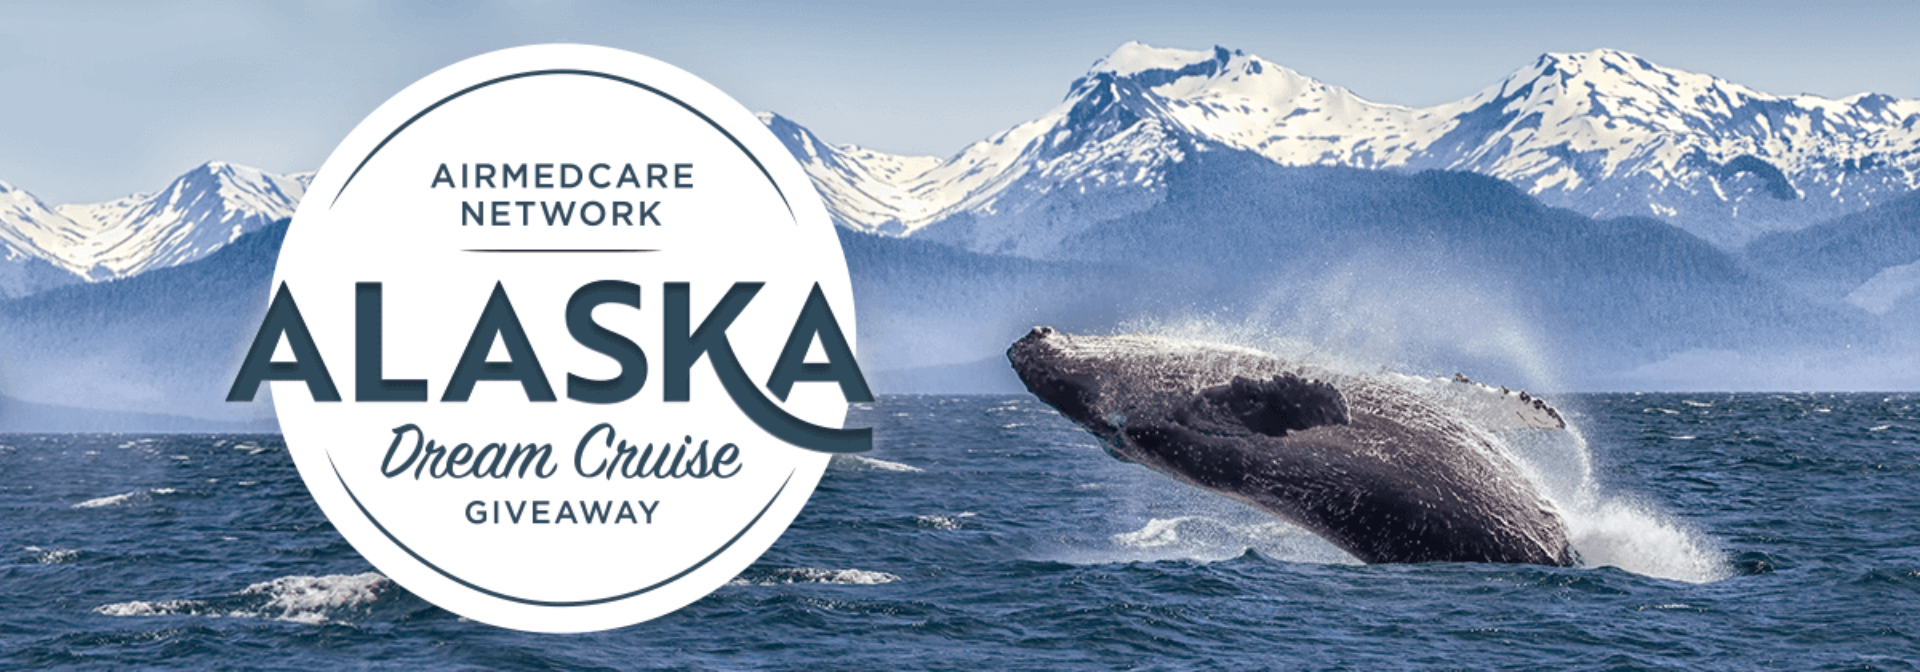 AirMedCare Network Alaska Dream Cruise Giveaway. Whale breaking the water in front of the Alaskan mountains.